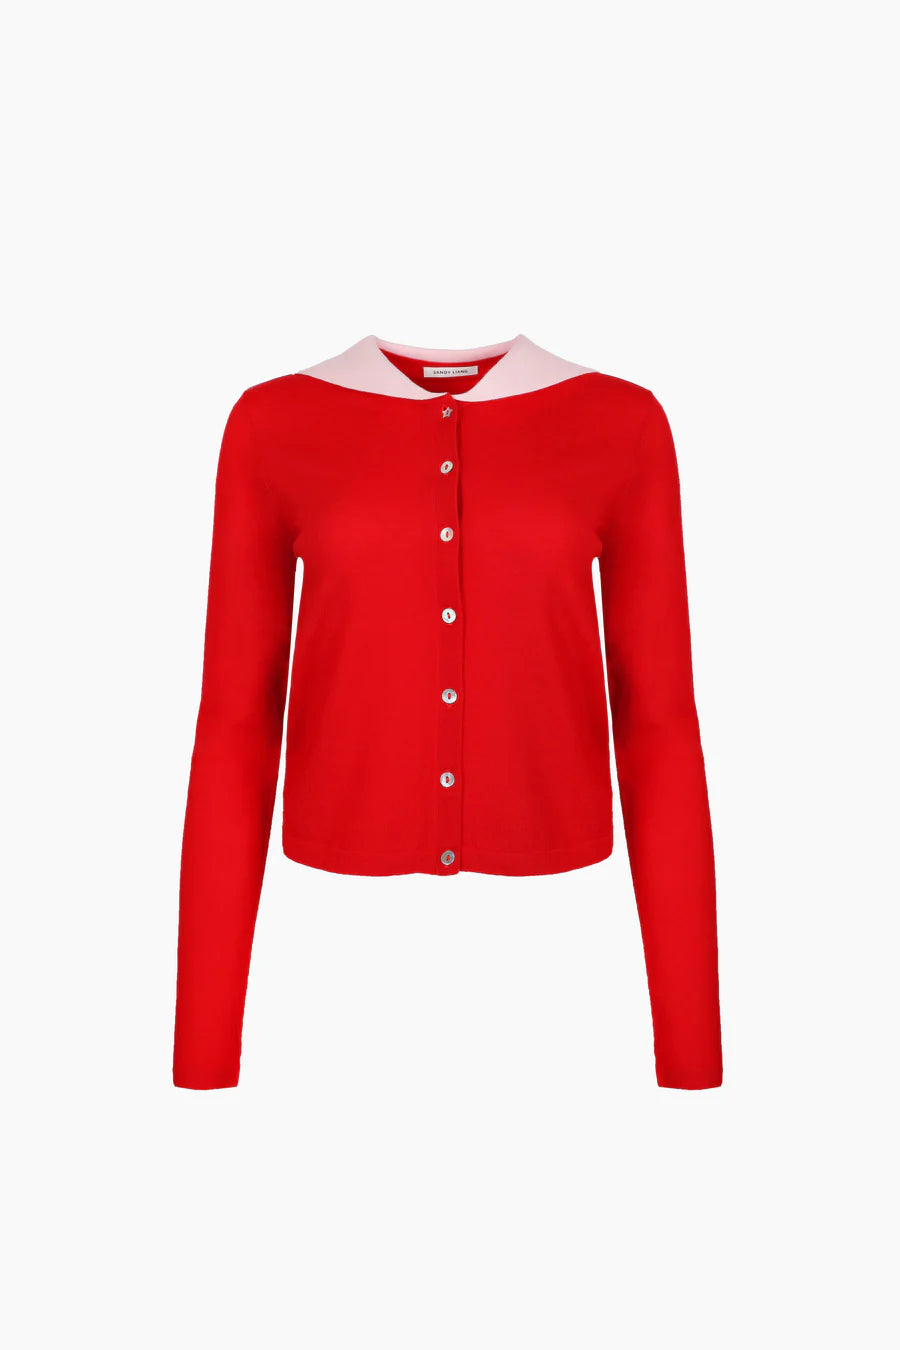 Sandy Liang Poppy Cardigan in Red